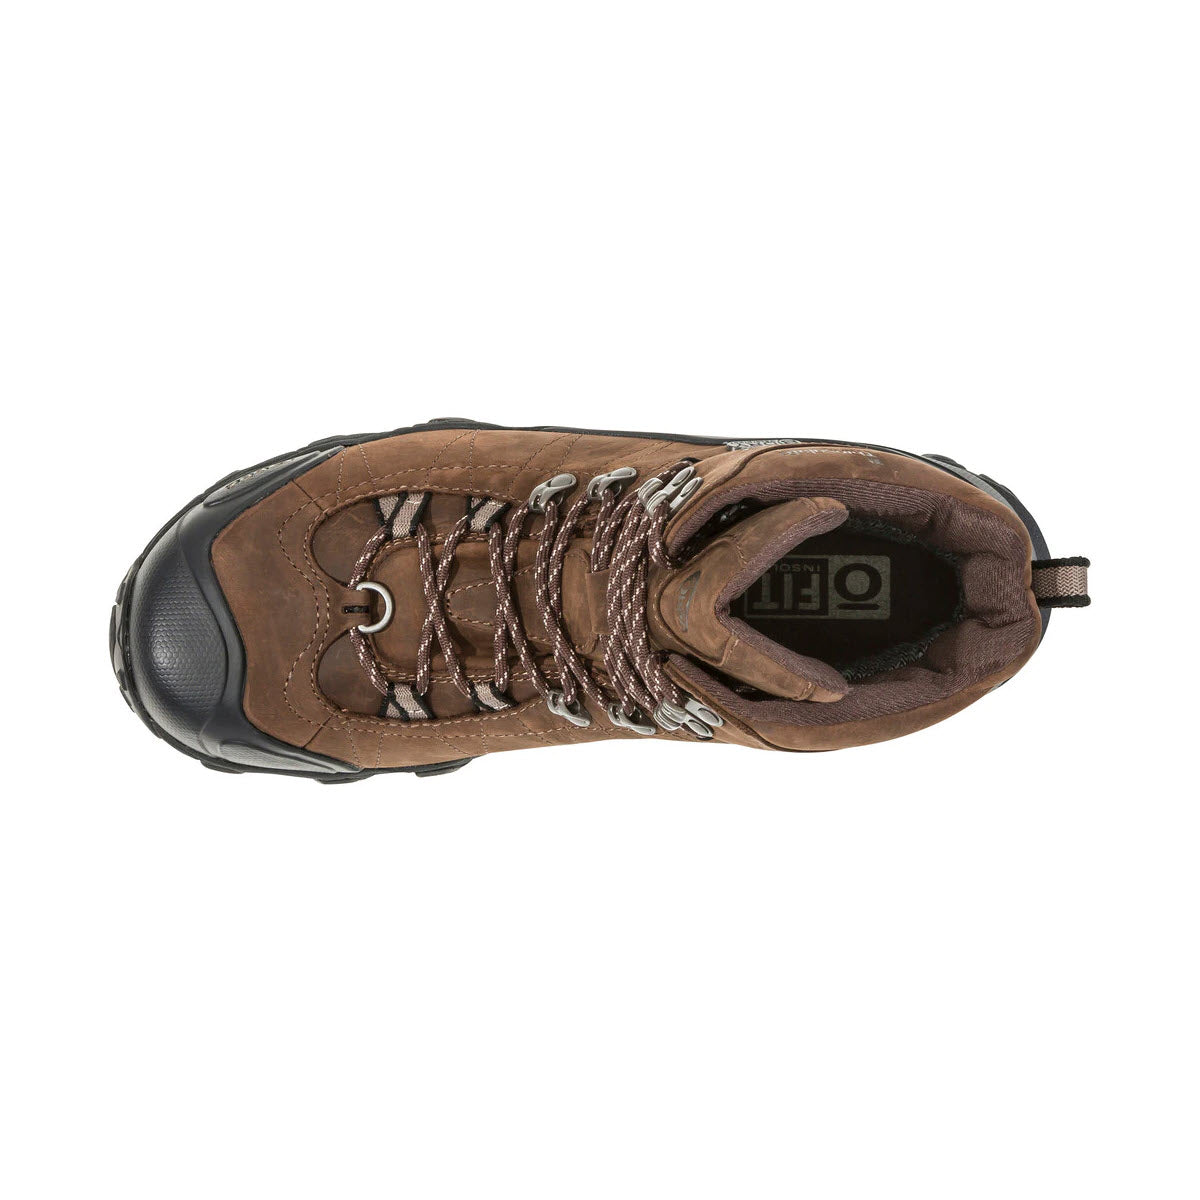 Top view of an Oboz BRIDGER 8&quot; INSULATED B-DRY BARK - MENS hiking boot with laced-up strings and a black toe cap featuring a winterized rubber outsole.